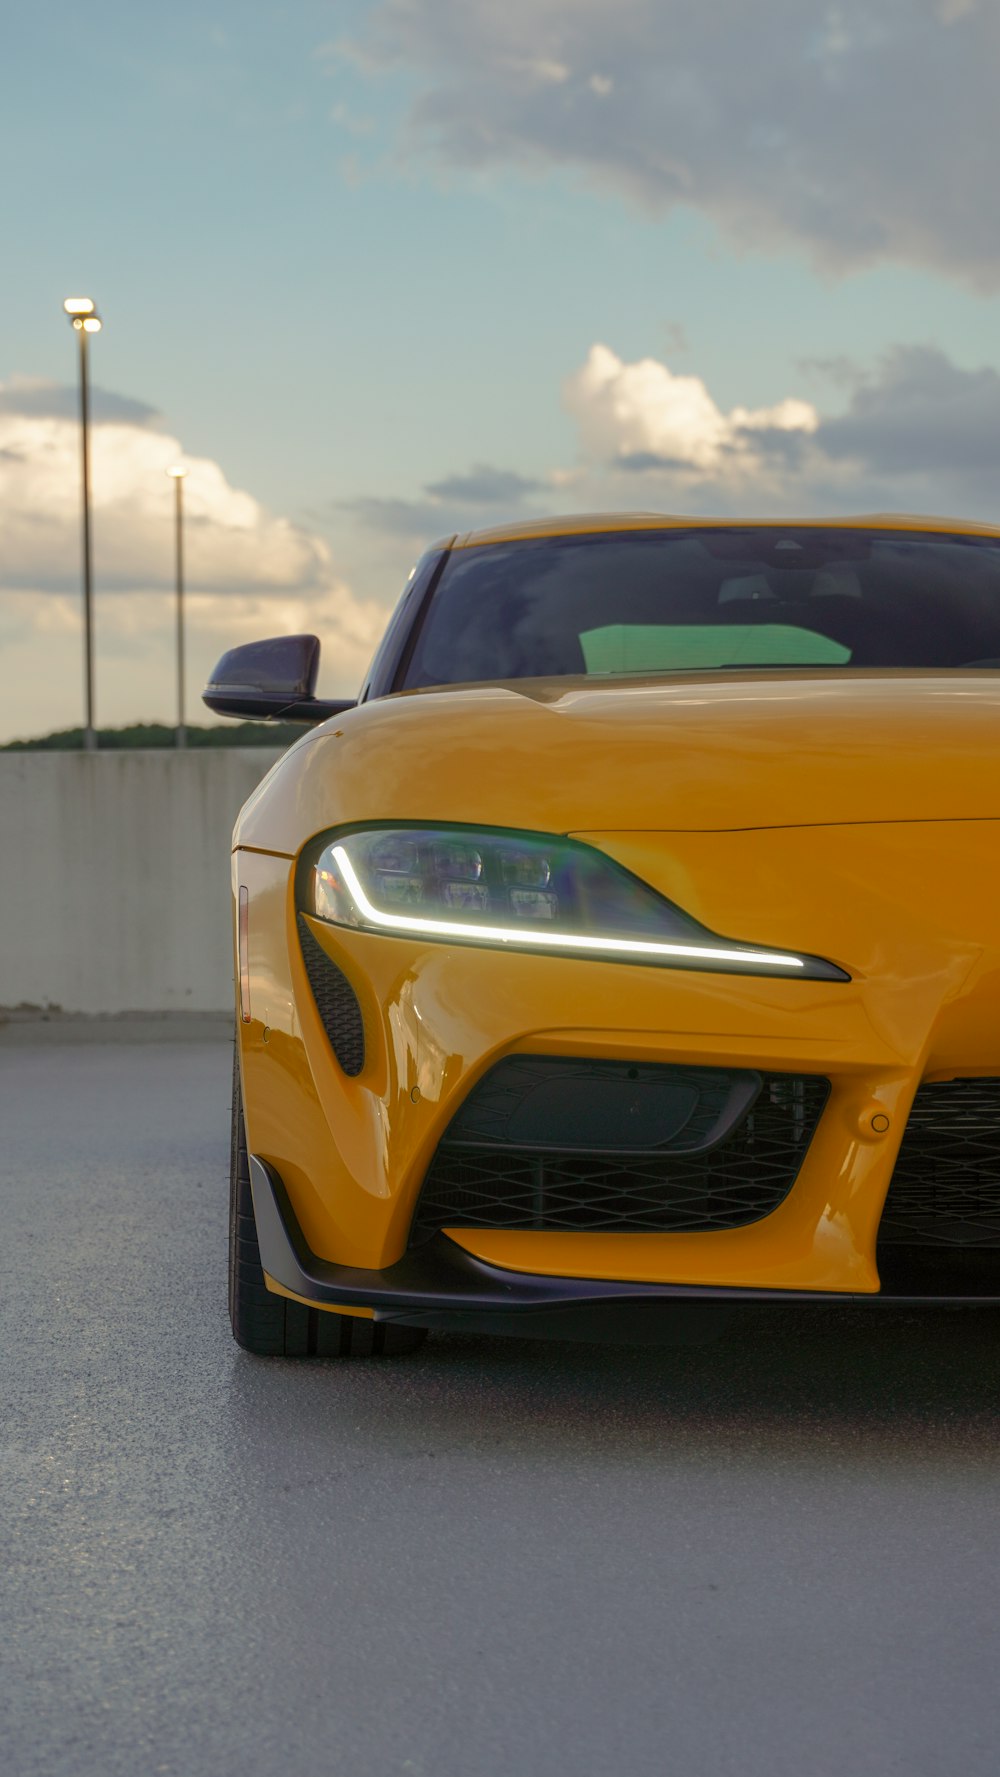 the front end of a yellow sports car